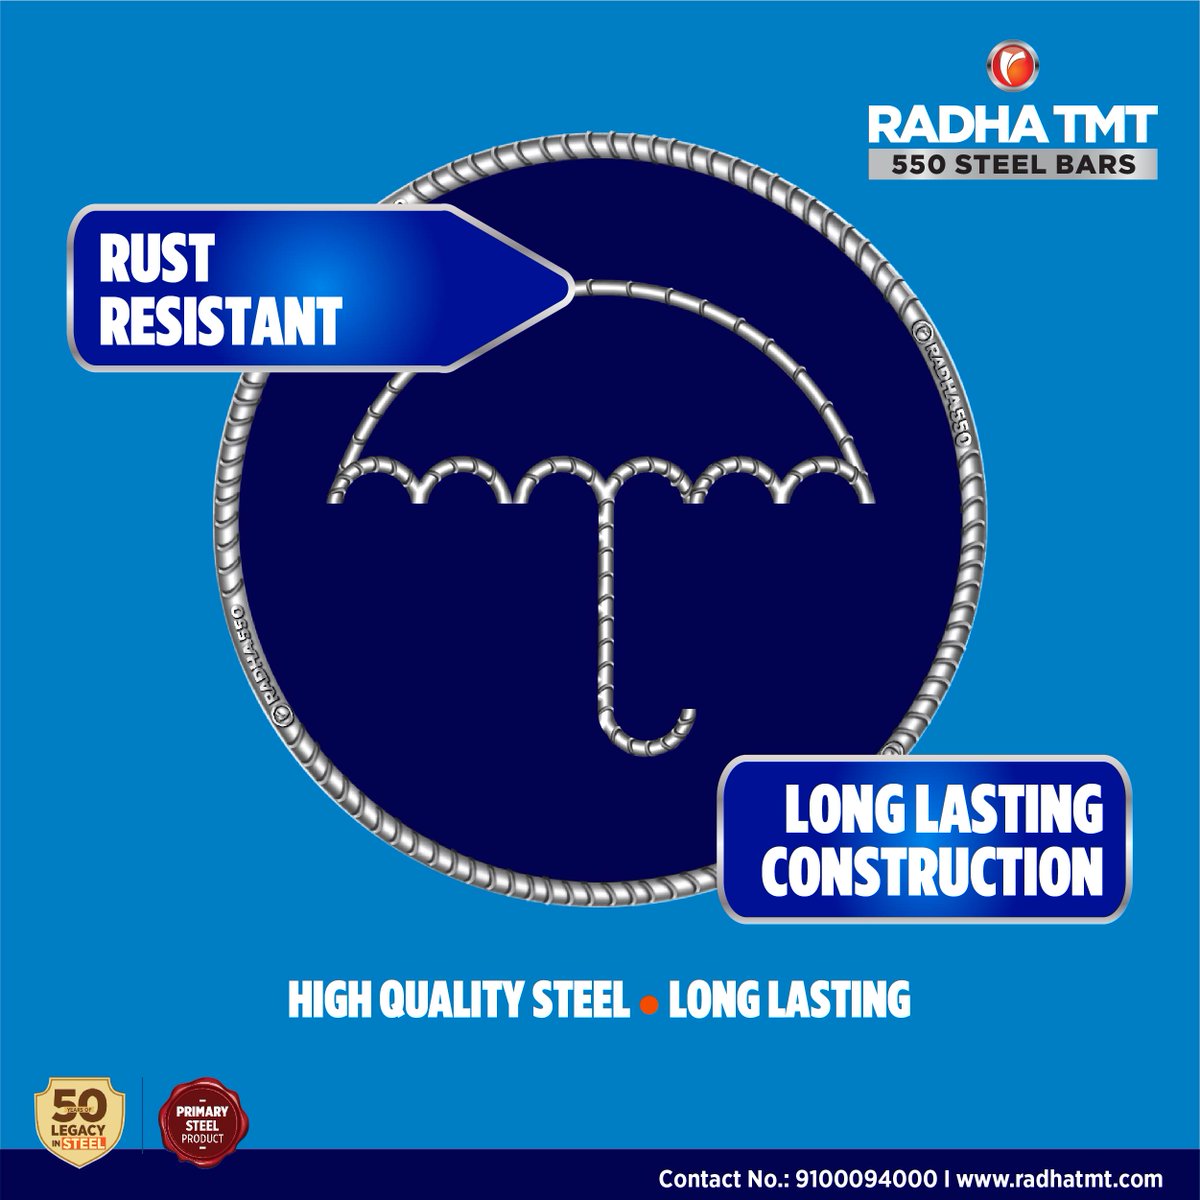 Radha TMT bars are treated to resist rust. They stay stronger for a longer time, leading to long lasting construction.

#RadhaTMT #TMTBars #LongLastingConstruction